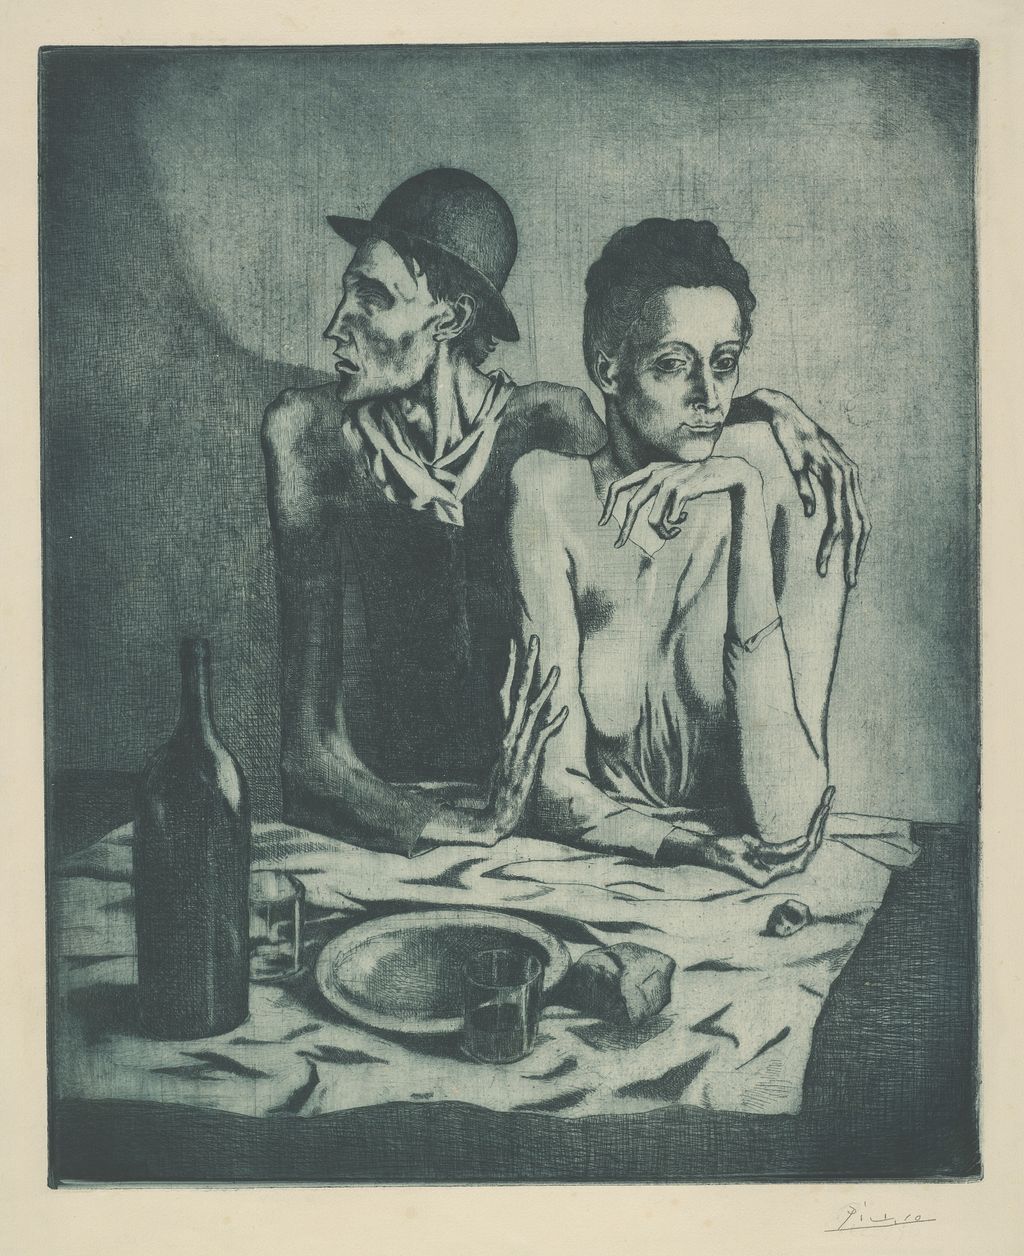 Pablo Picasso. The Frugal Meal, from The Saltimbanques,1904. The Art Institute of Chicago, Clarence Buckingham Collection. © 2013 Estate of Pablo Picasso / Artists Rights Society (ARS), New York.